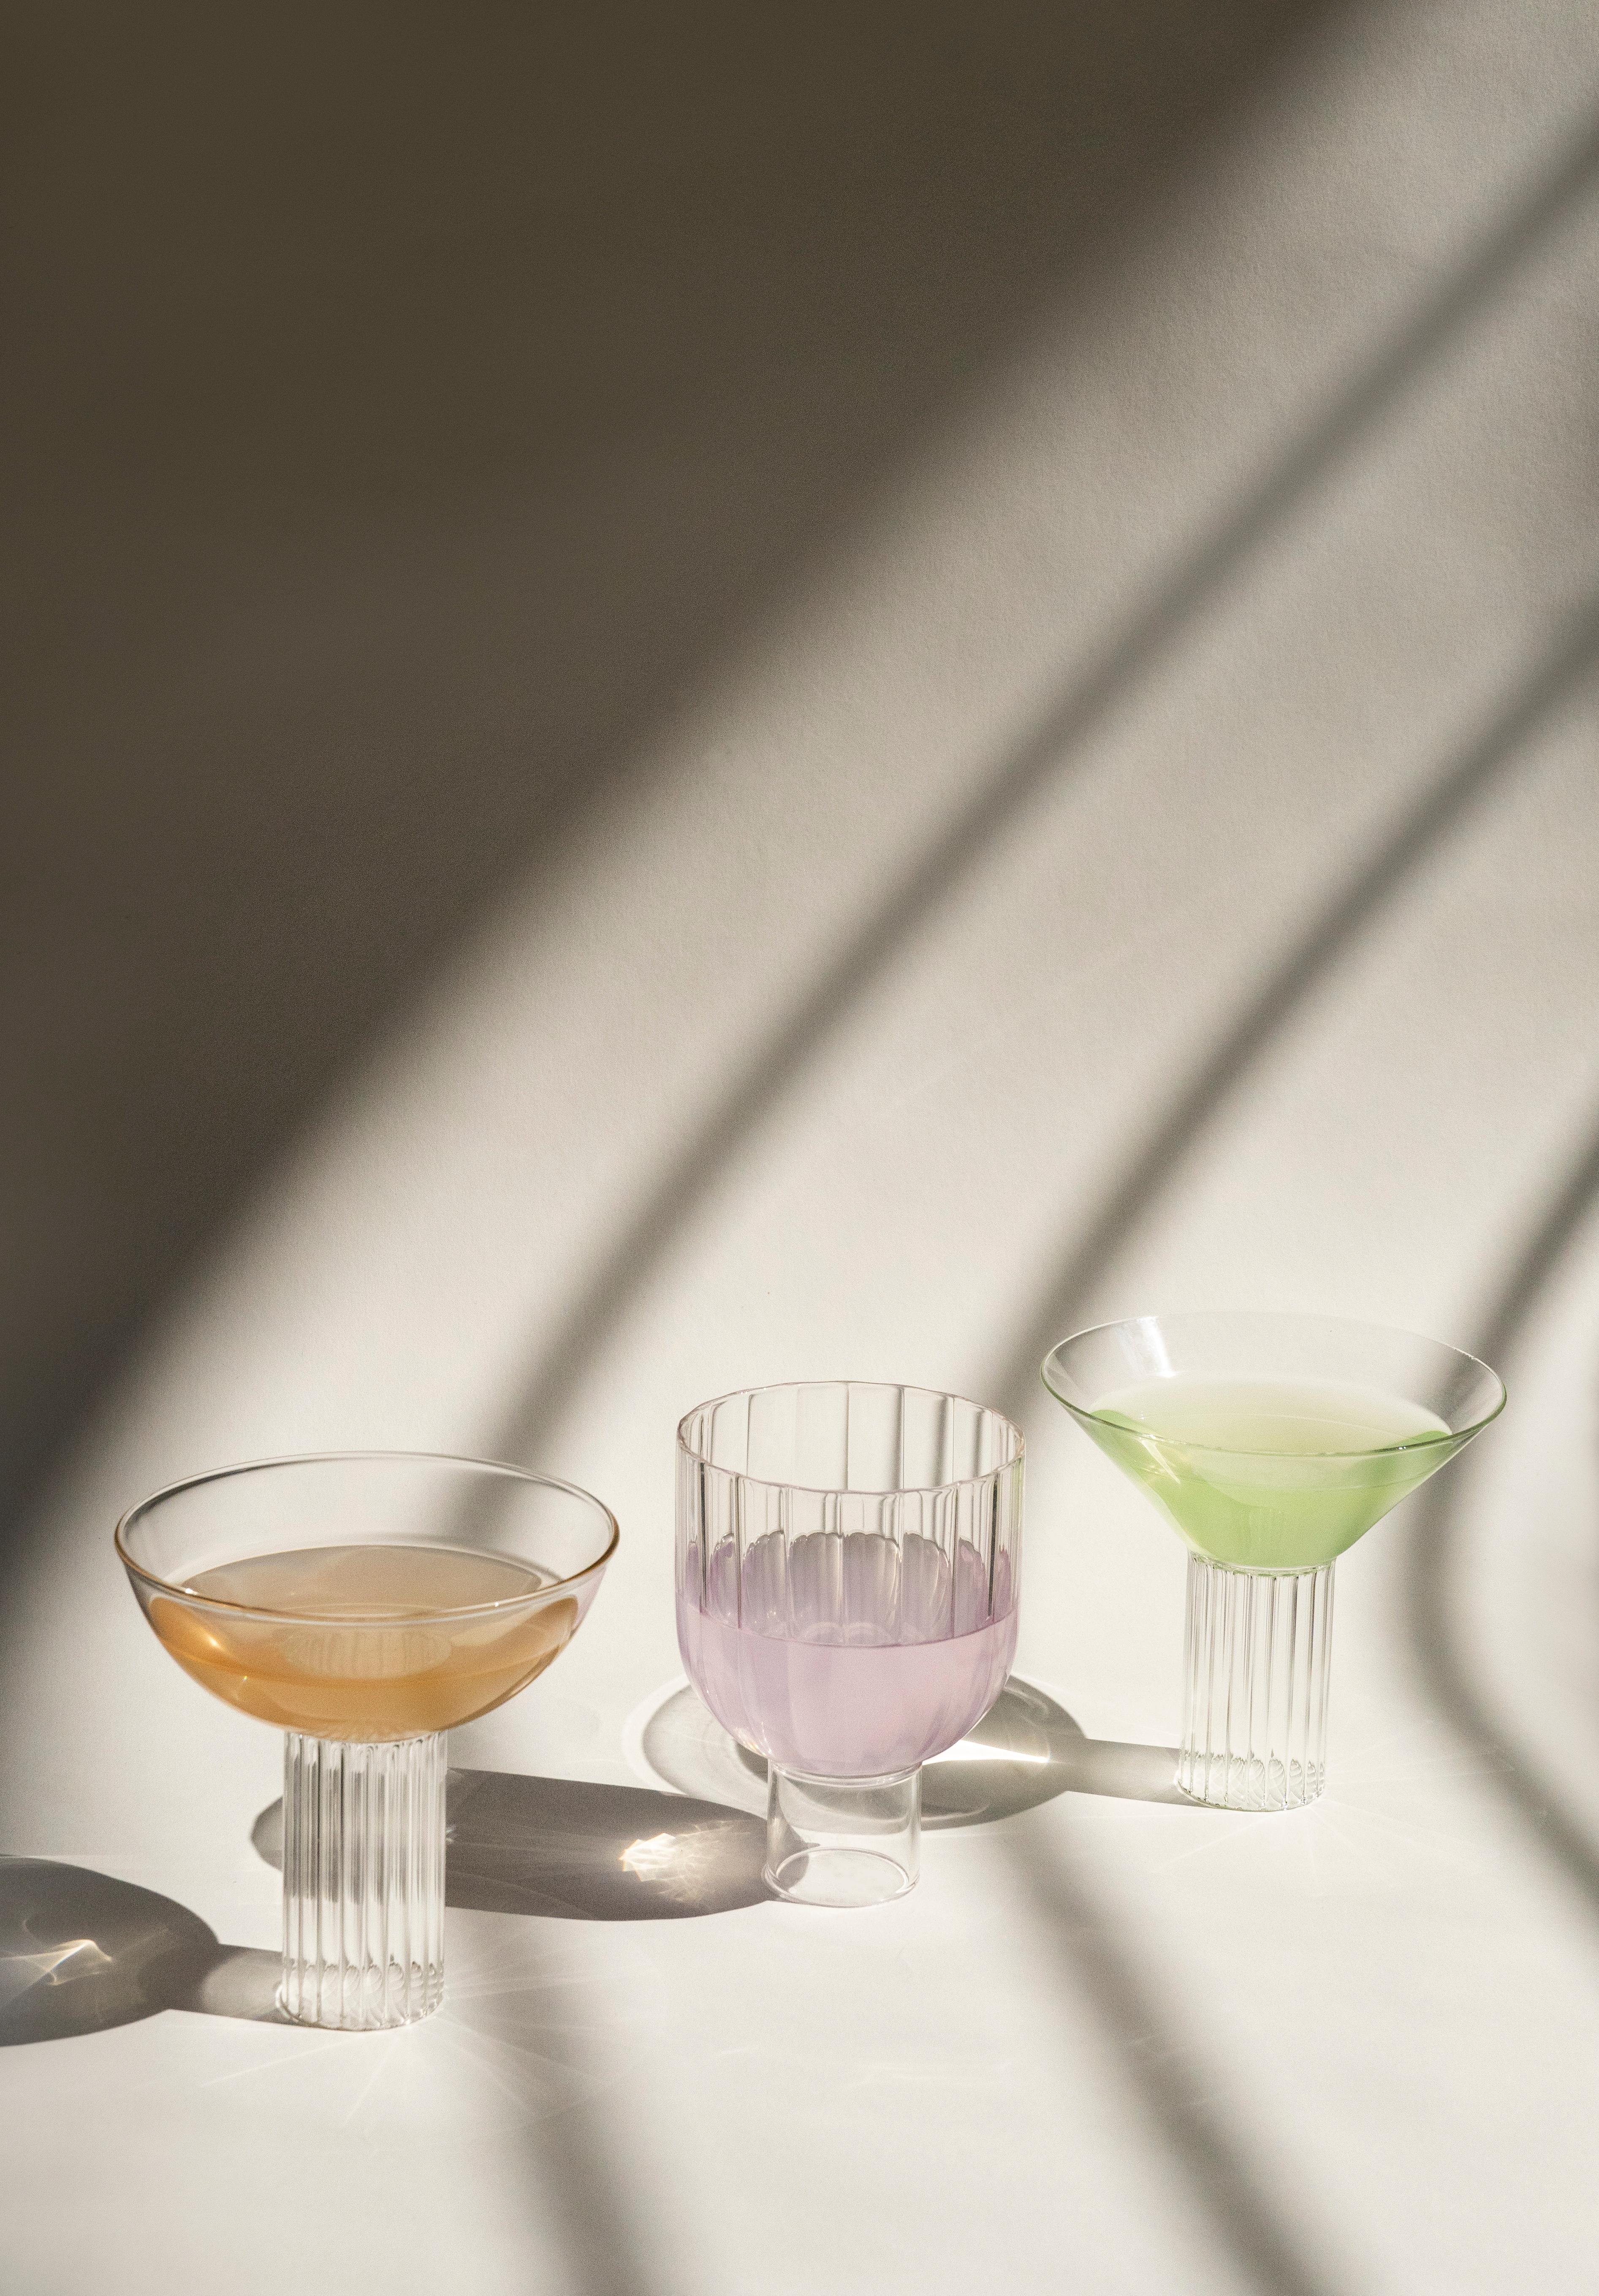 The striking geometric shapes of CALICI MILANESI recall the Modern architectural gems of Milan. Each piece is handmade in Italy by master glassblowers using high-quality borosilicate glass. 

Dishwasher safe and resistant to thermal shock, allowing